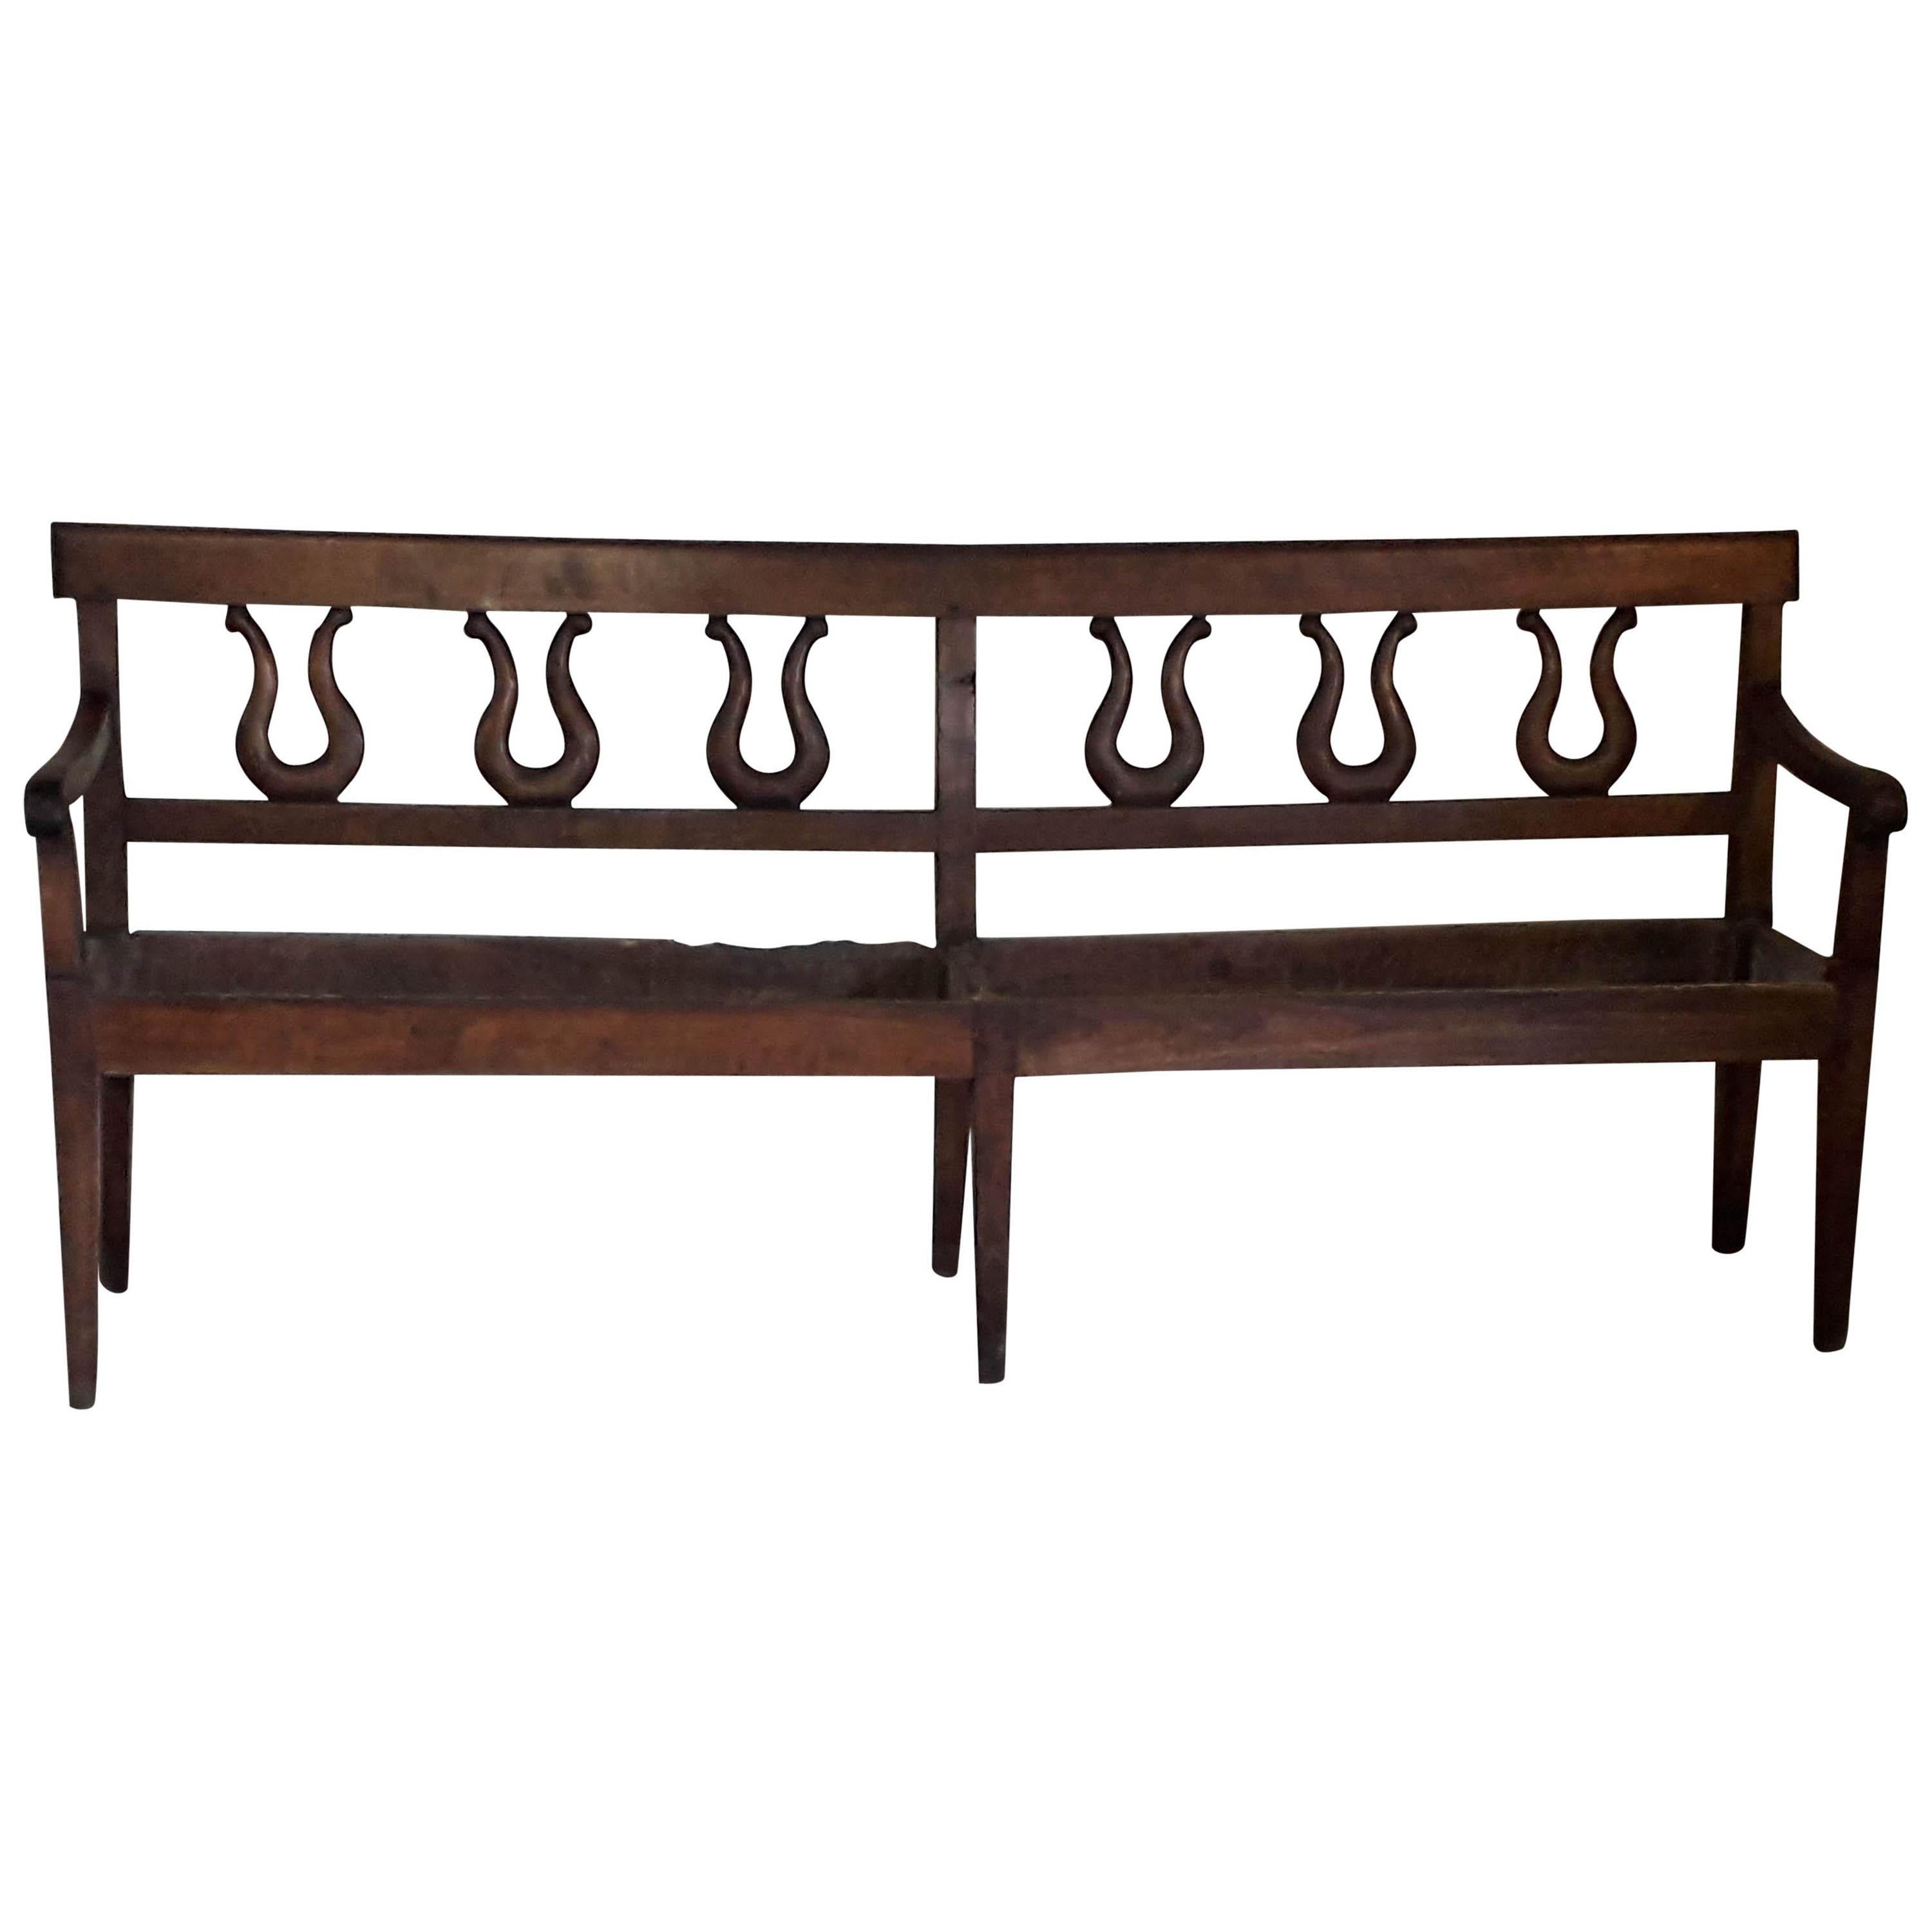 19th Century Bench Seat in Cherrywood